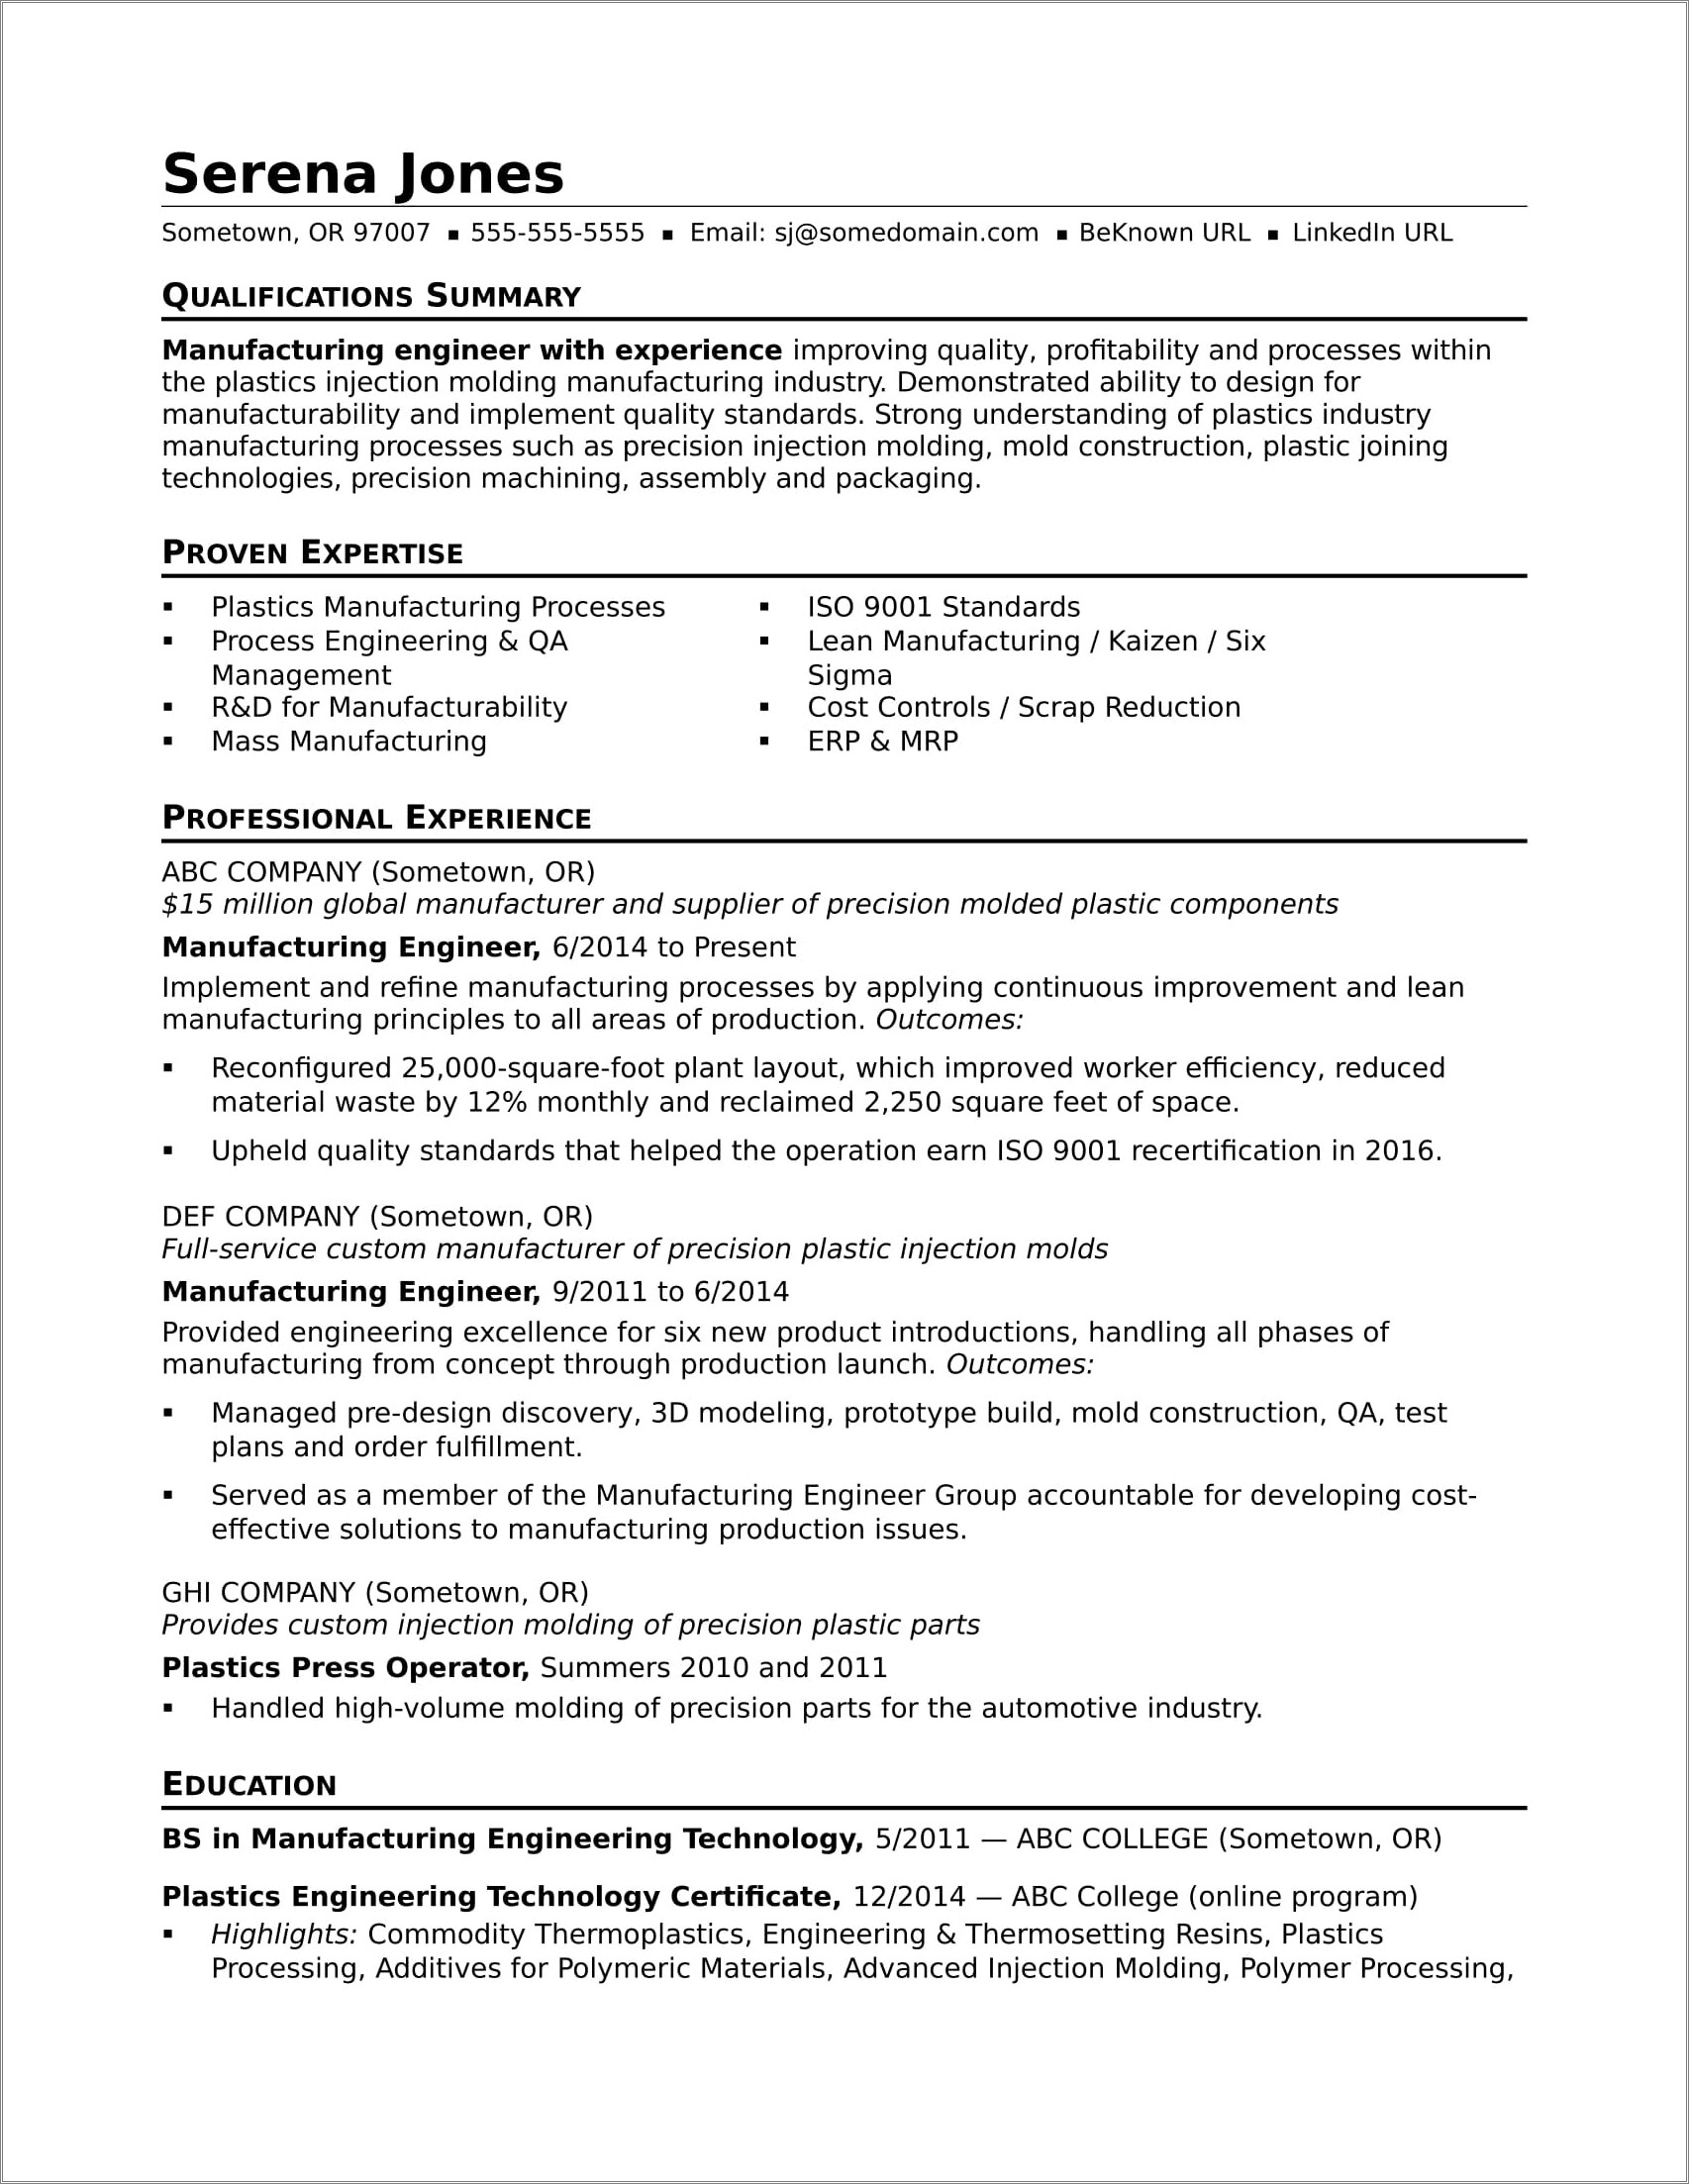 Sample Resume For Semiconductor Field Engineer